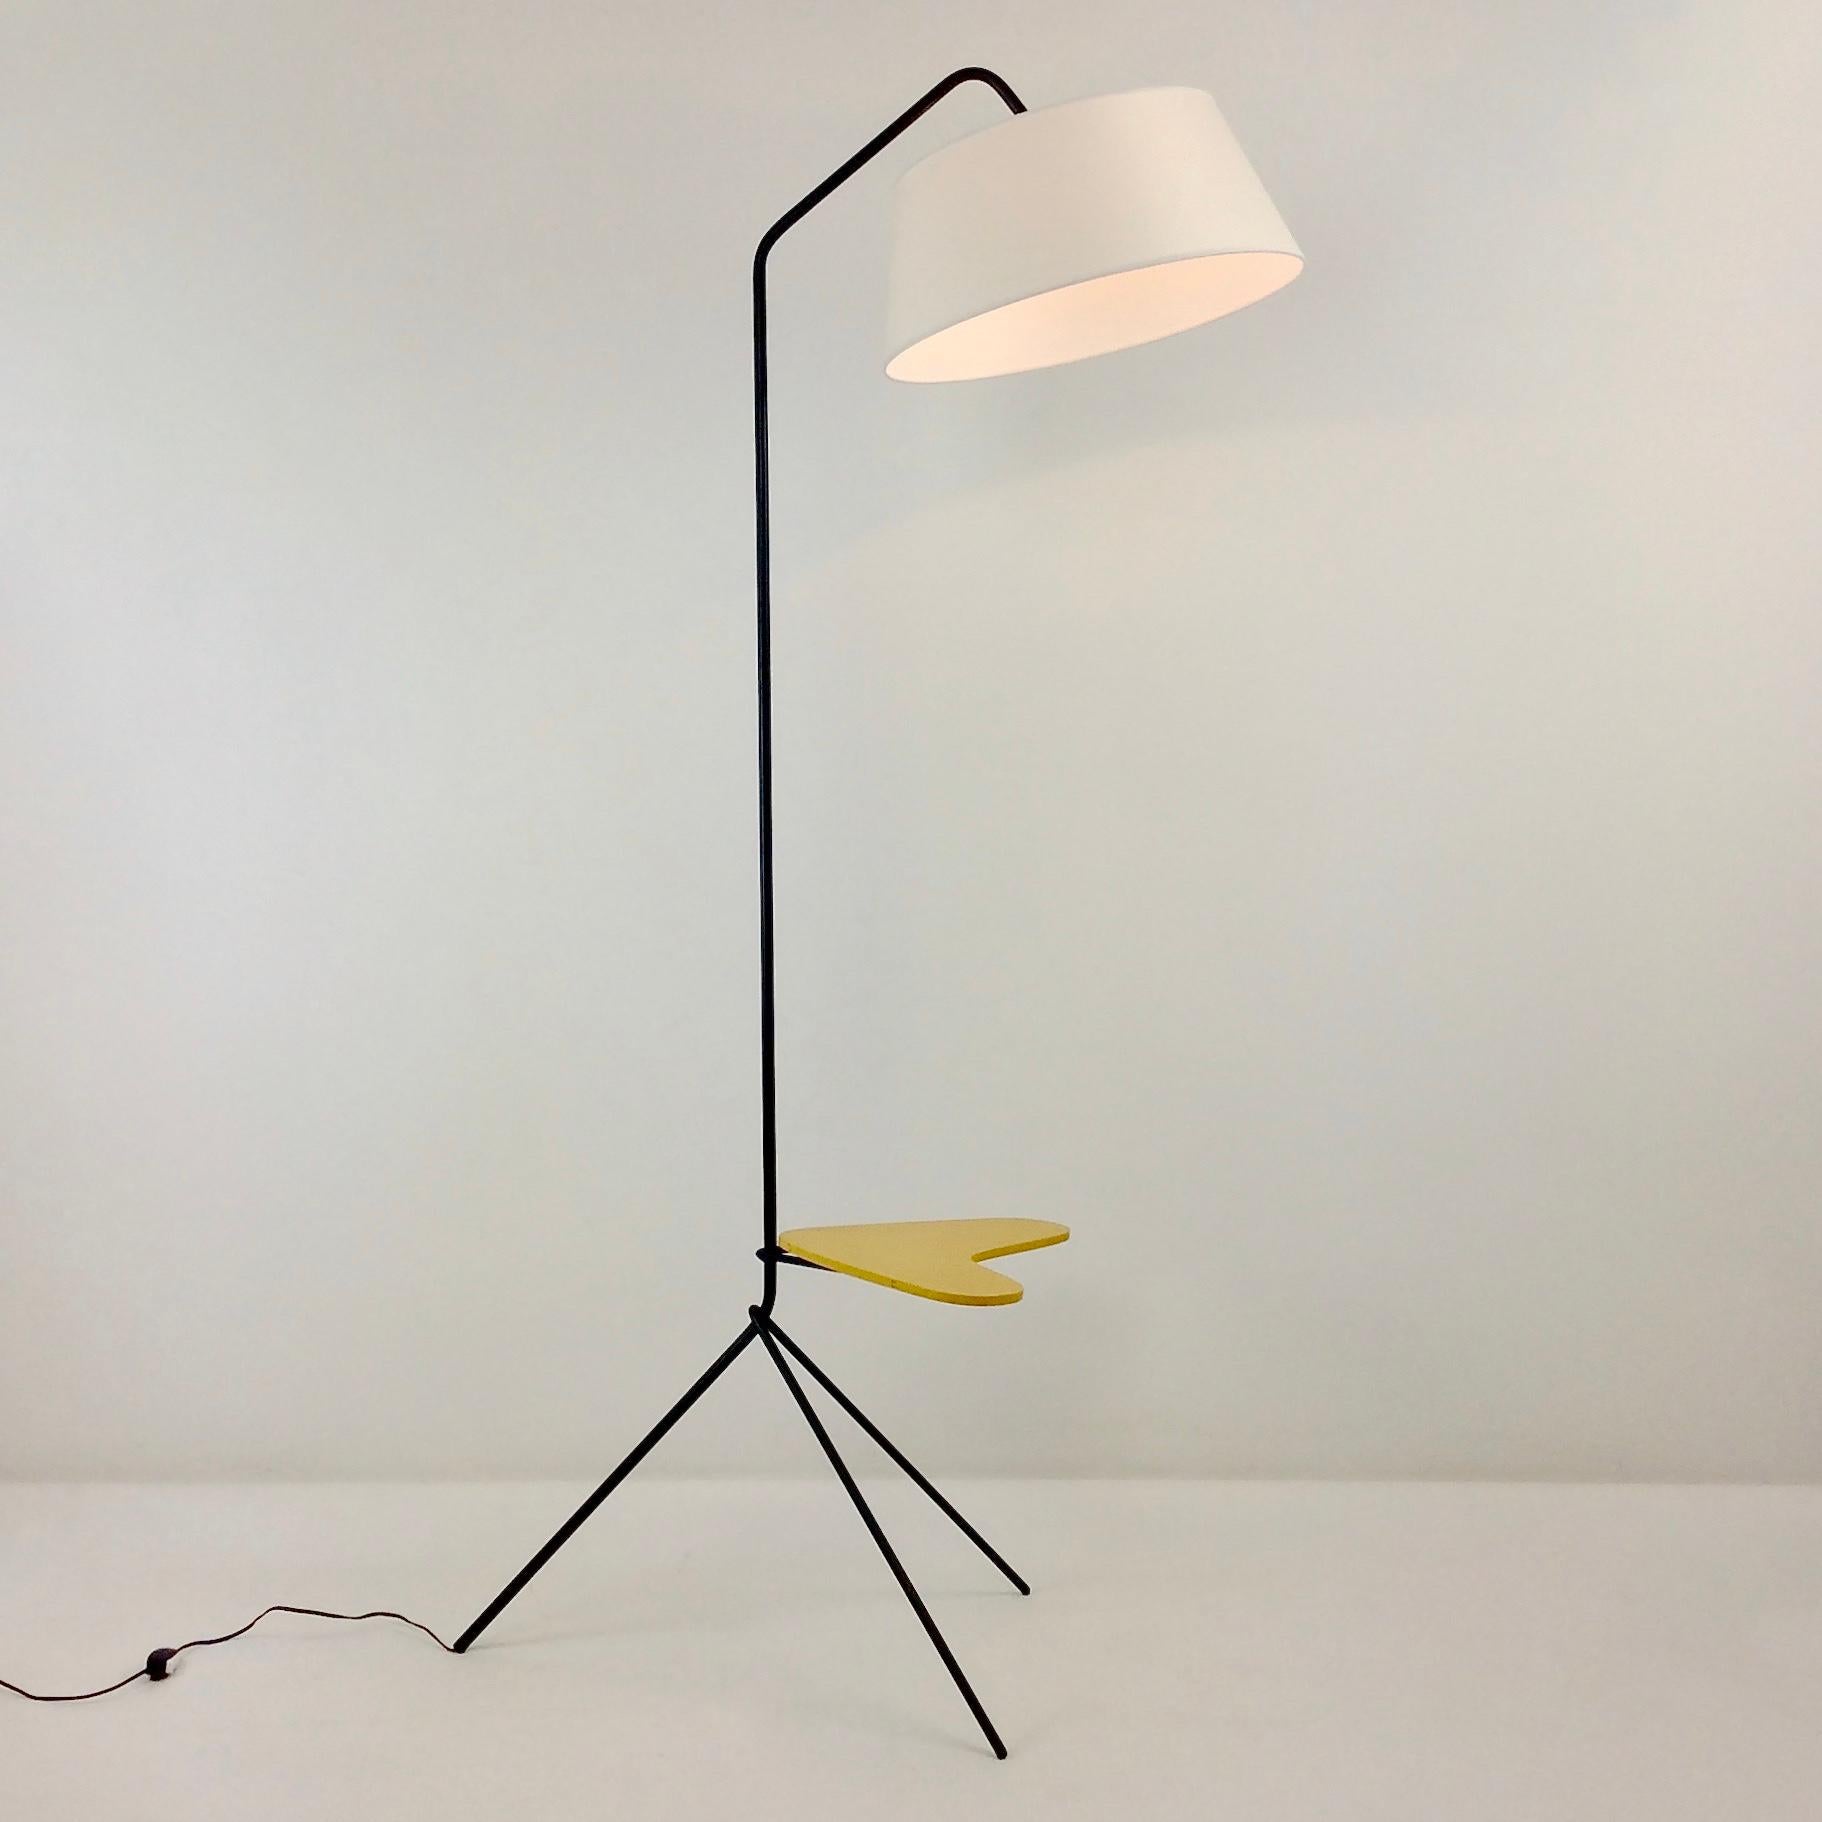 Nice mid-century tripod floor lamp, circa 1950, France.
Black tubular metal, yellow painted wooden shelf / table.
New white fabric shade, one B22 bulb.
Dimensions: maximum height 159 cm, 83 cm W, 45 cm D.
All purchases are covered by our Buyer